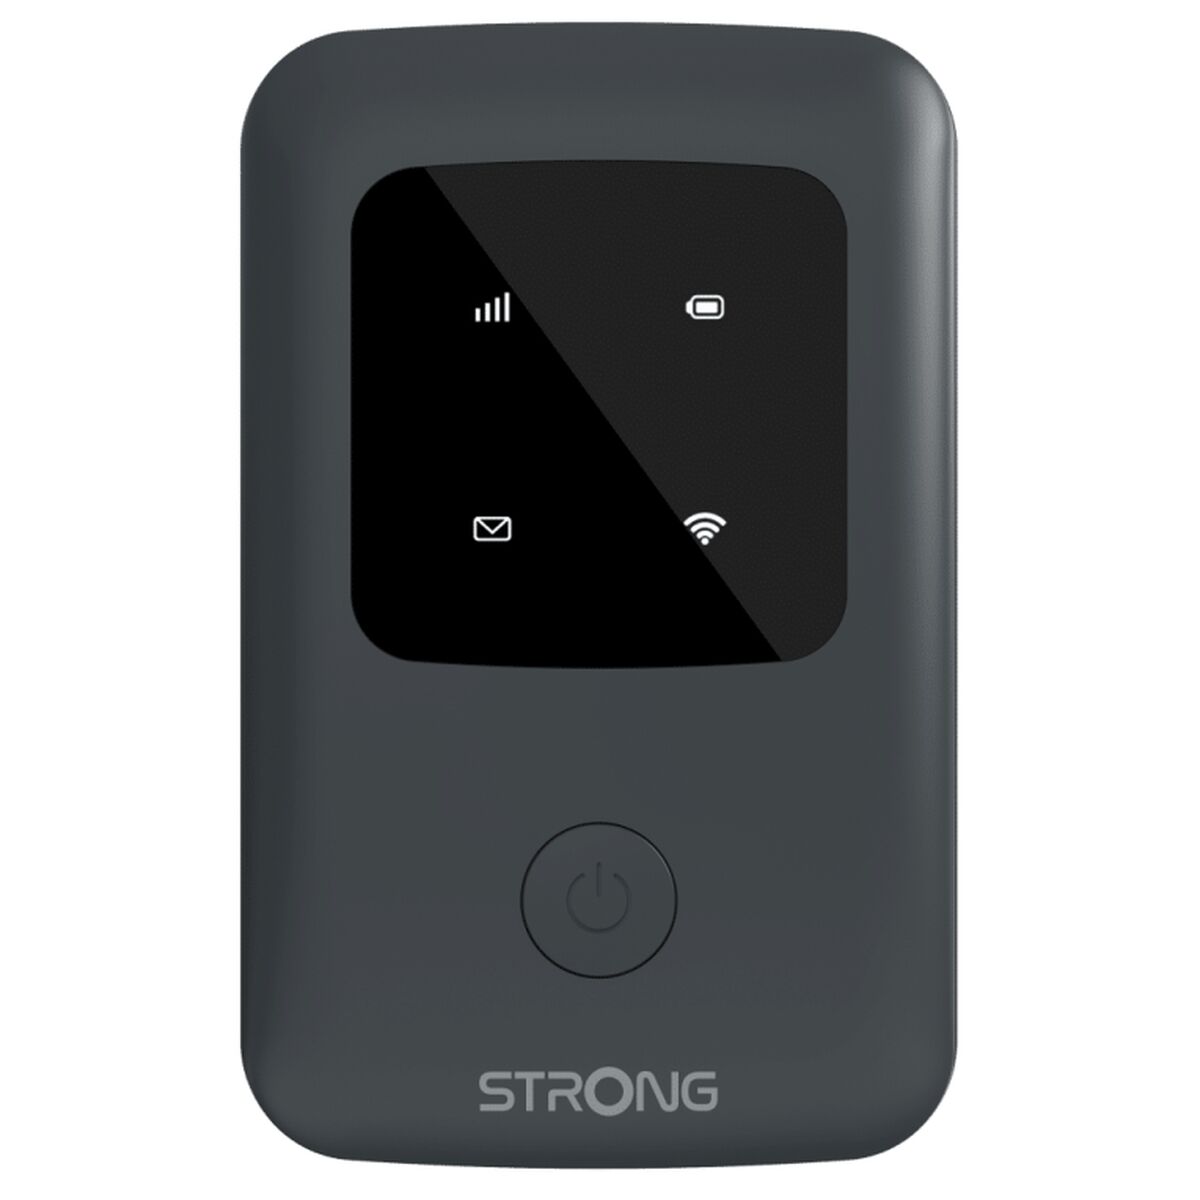 Router STRONG 4GMIFI150, STRONG, Computing, Network devices, router-strong-4gmifi150, Brand_STRONG, category-reference-2609, category-reference-2803, category-reference-2826, category-reference-t-19685, category-reference-t-19914, category-reference-t-21371, Condition_NEW, networks/wiring, Price_50 - 100, Teleworking, RiotNook